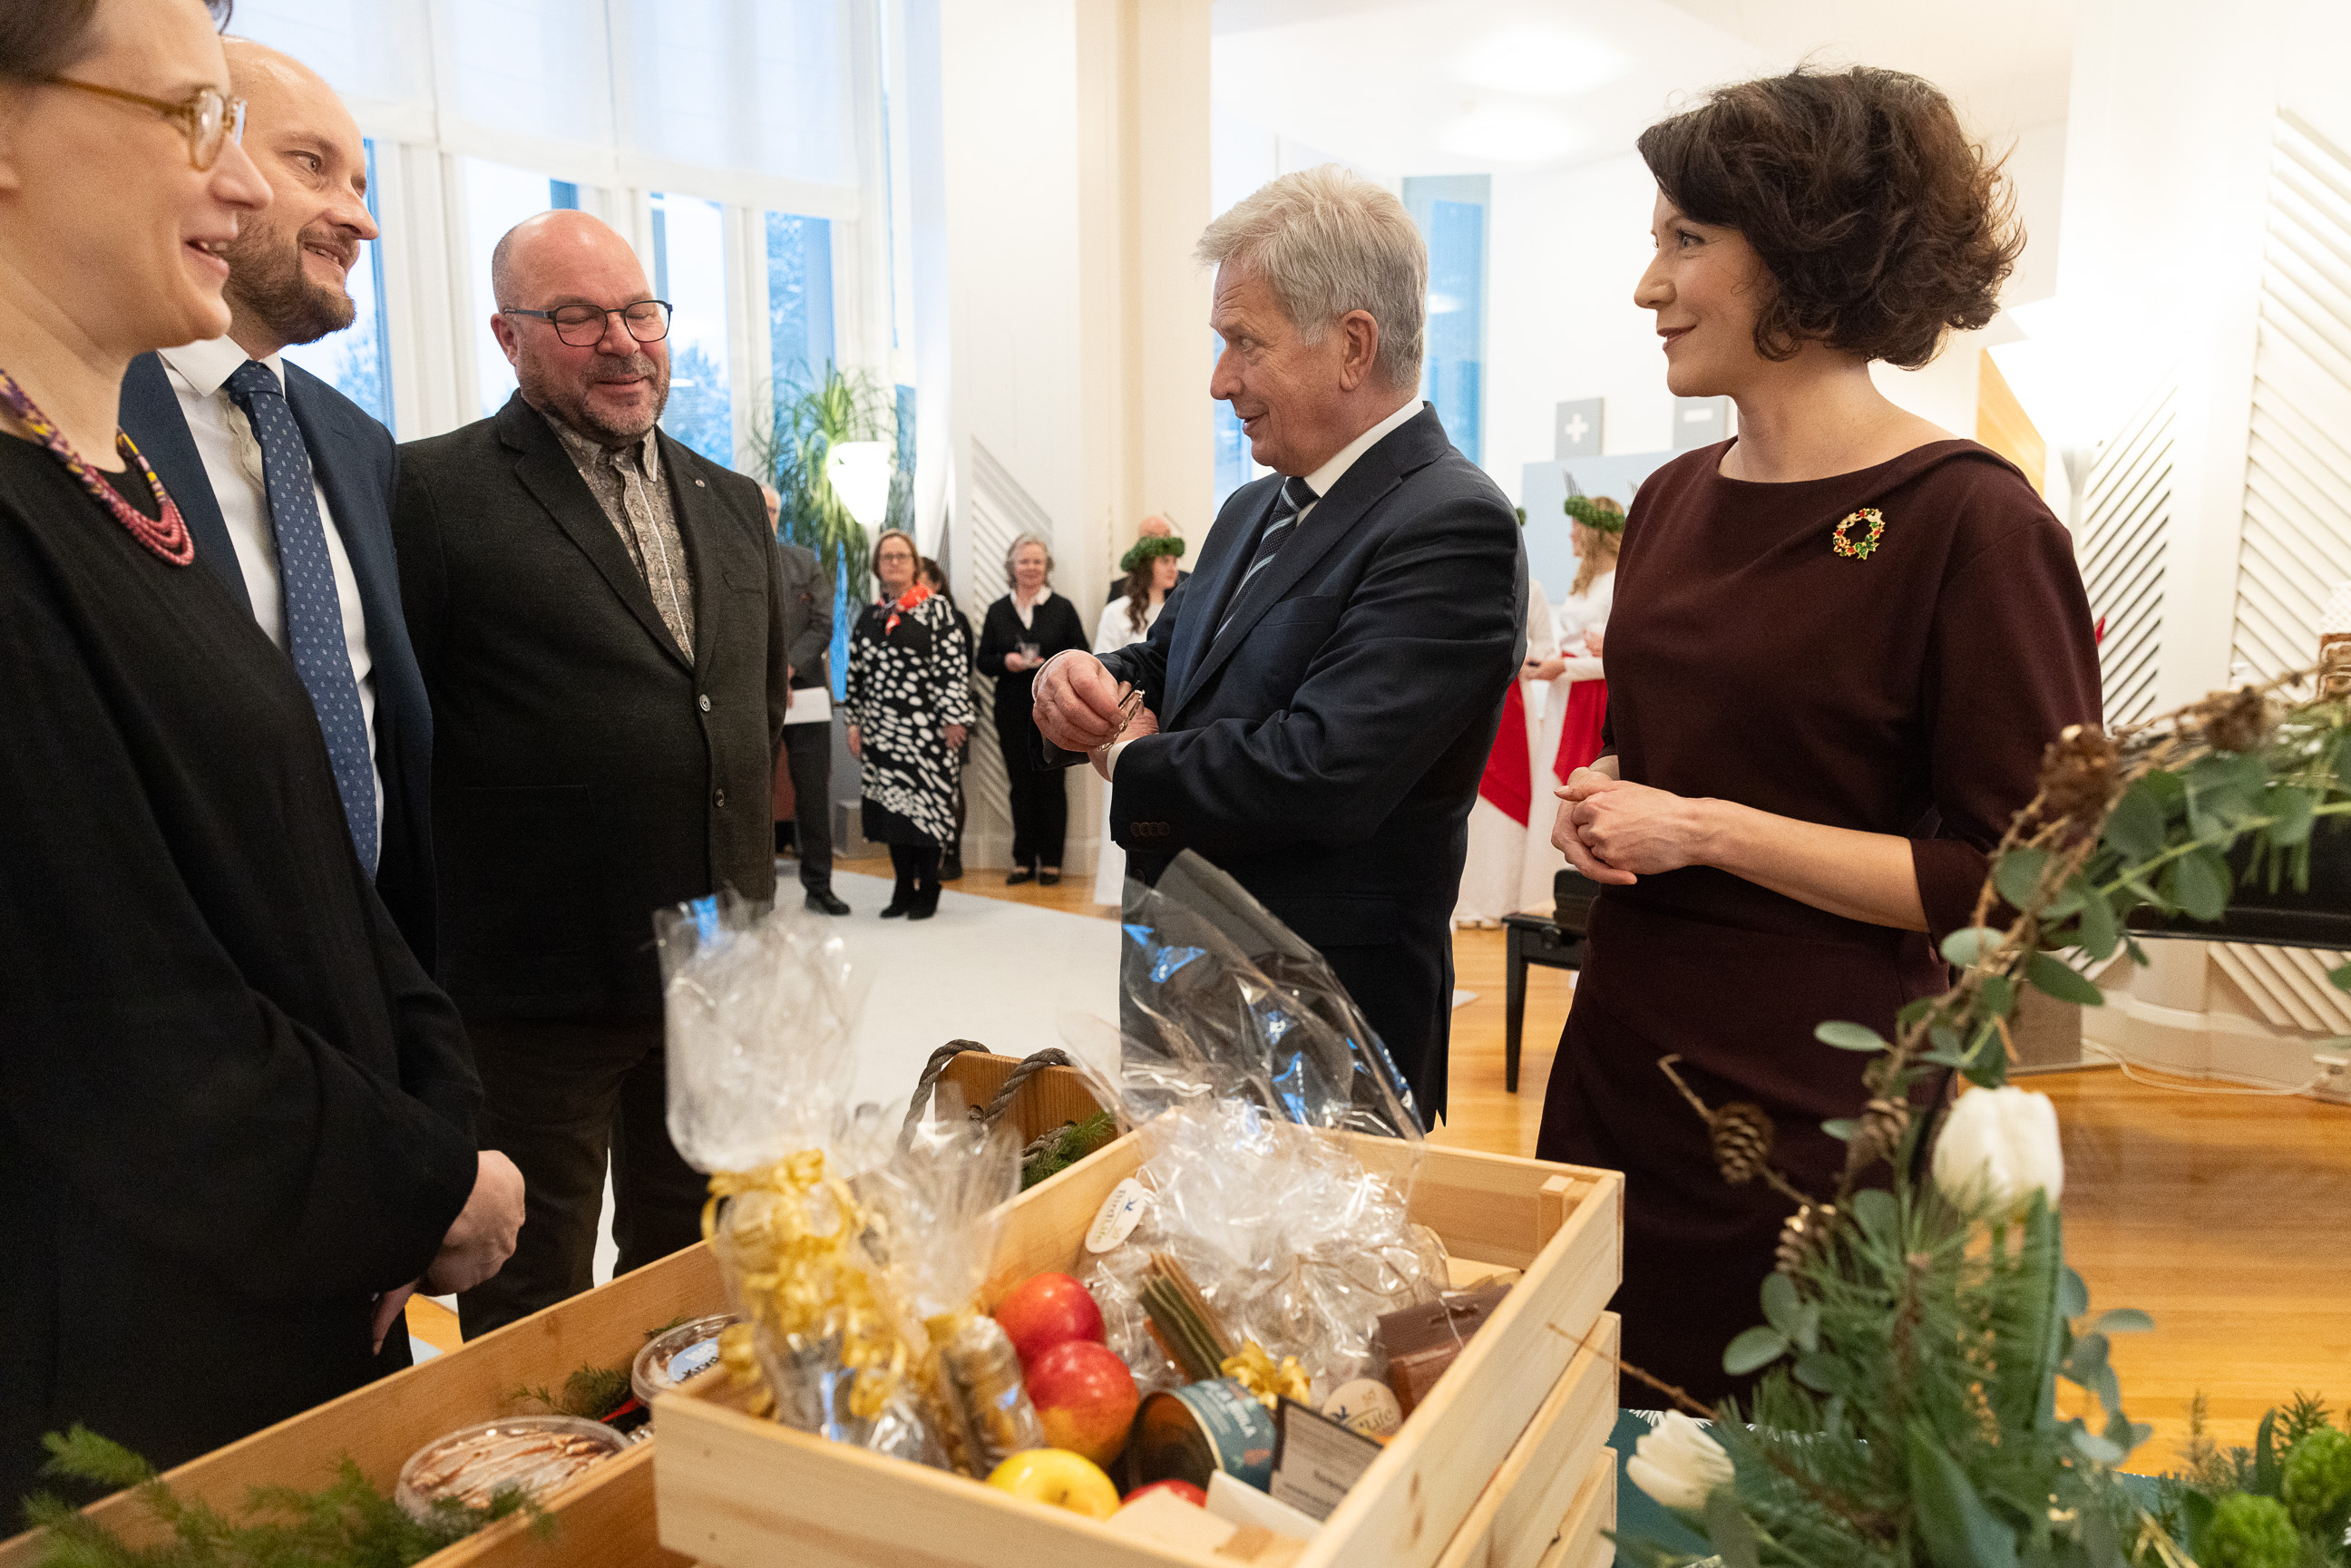 Representatives of animal welfare and conservation organisations presented the President and his spouse with a basket of vegan products from Finnish growers and producers. Photo: Matti Porre/Office of the President of the Republic of Finland